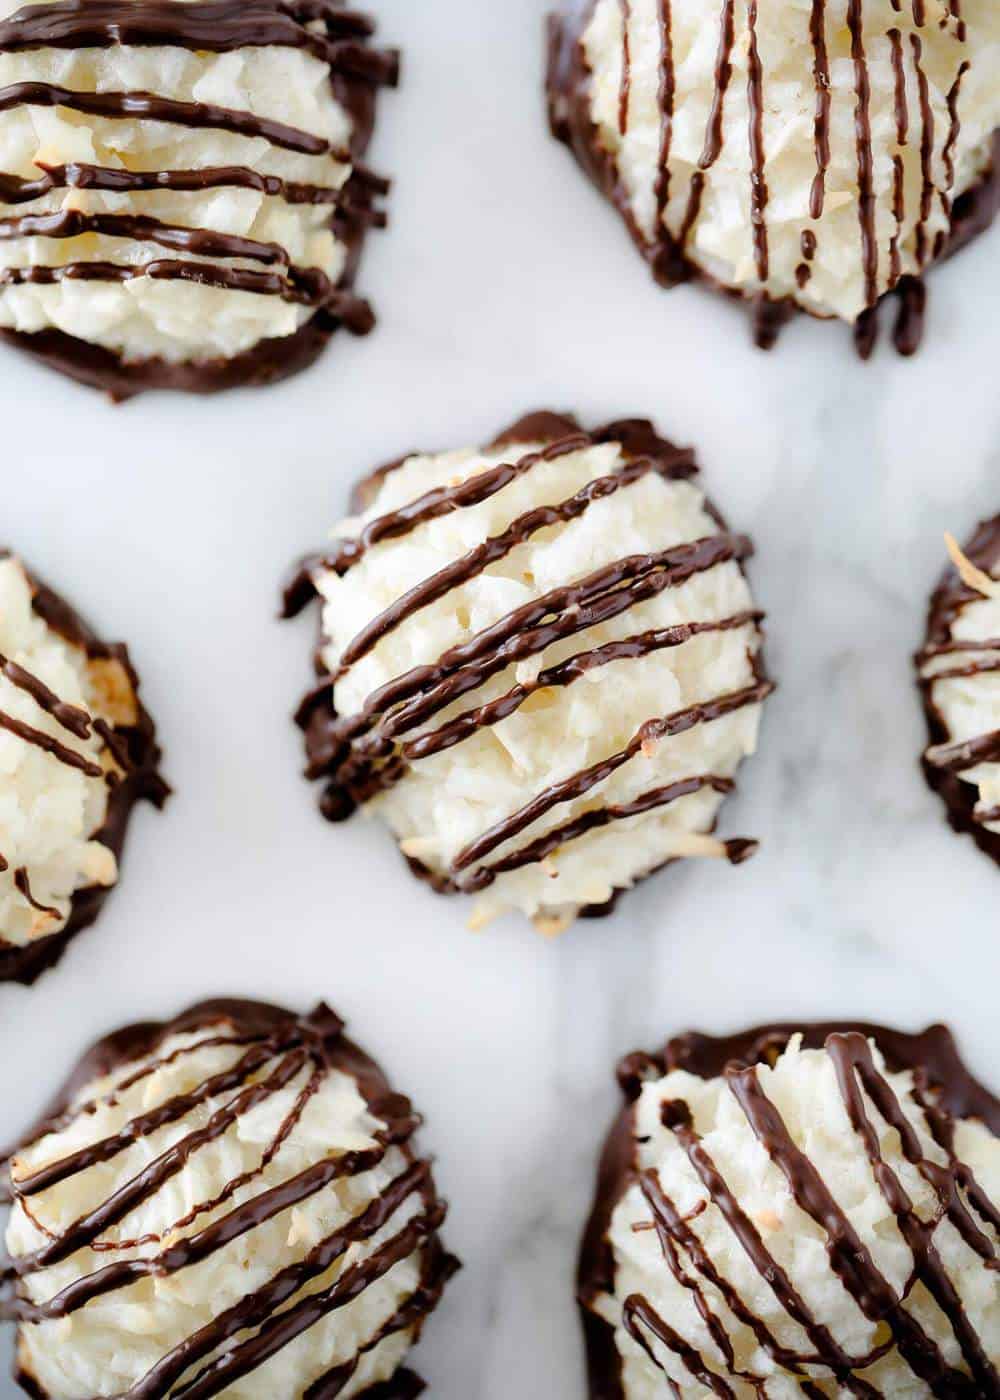 Macaroon cookies drizzled in chocolate.